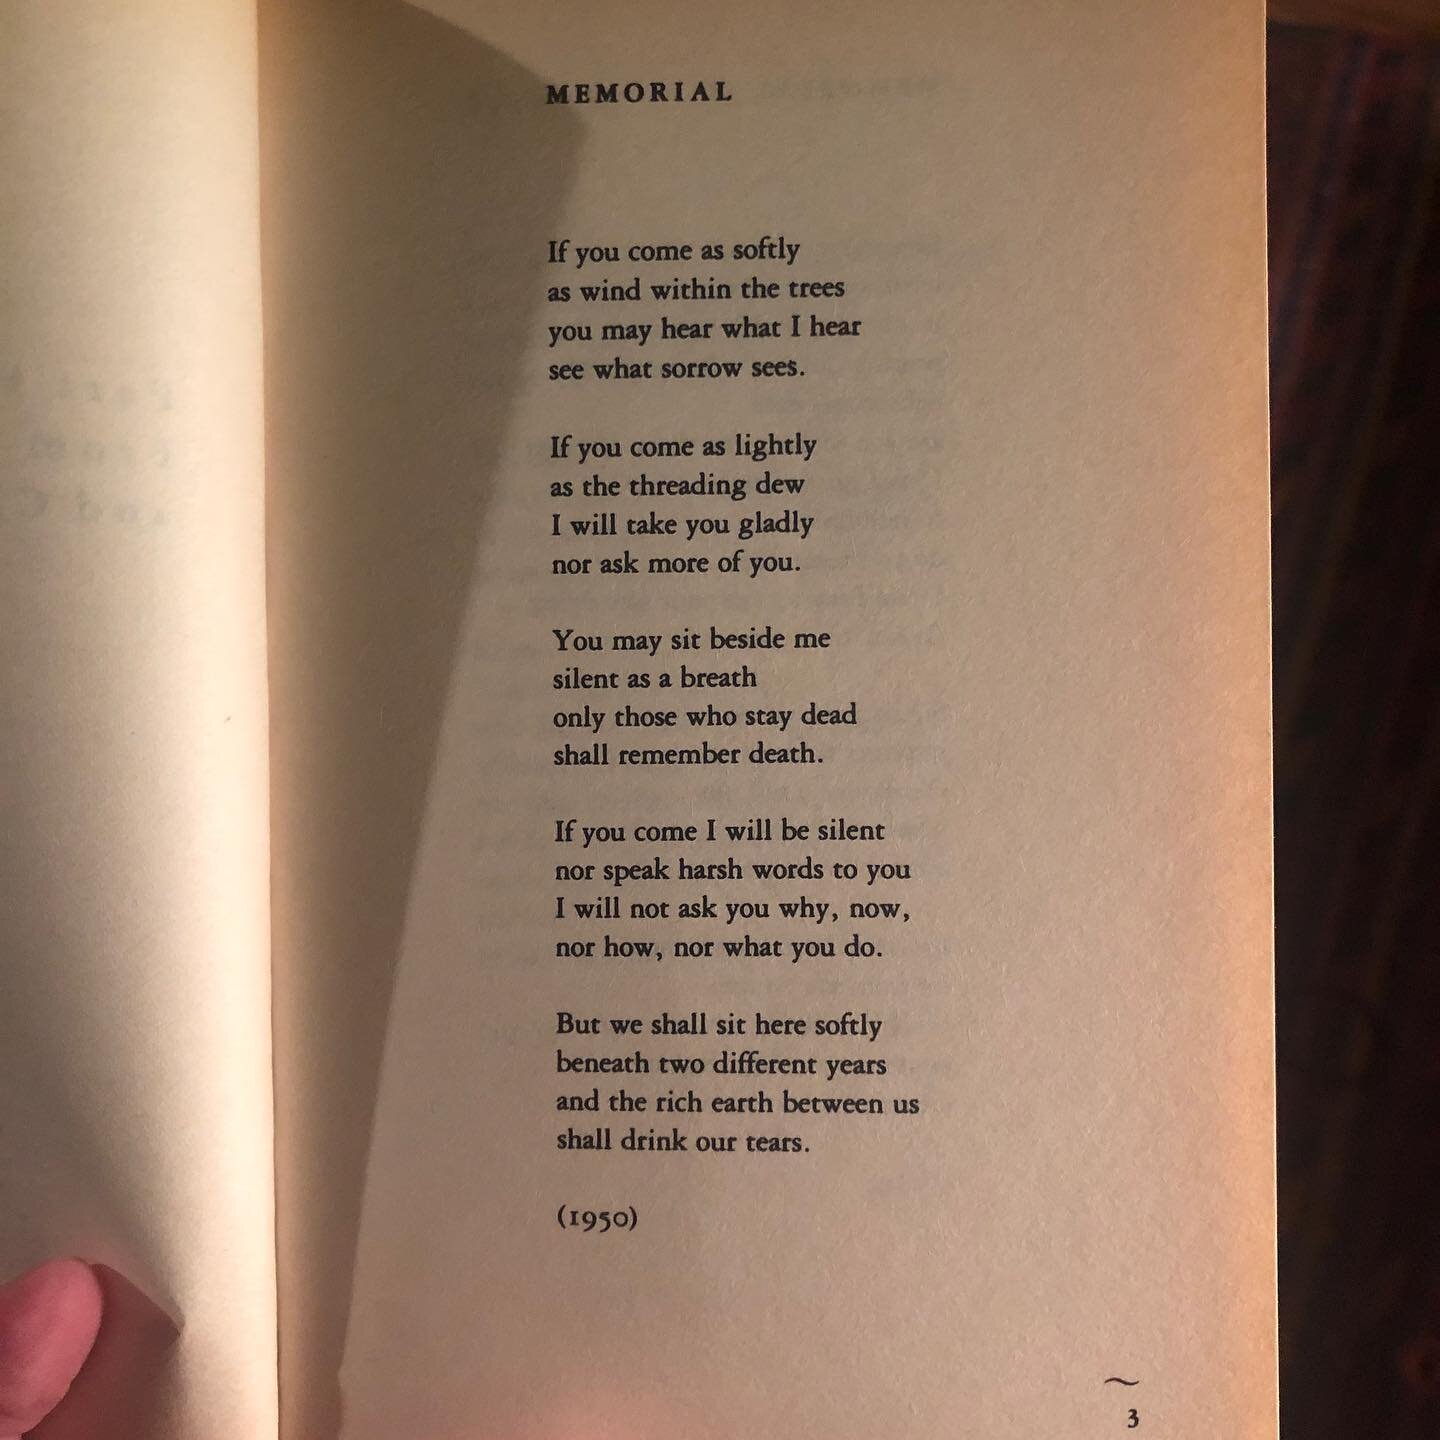 I am thinking about &ldquo;Memorial&rdquo;, the first poem in Audre Lorde&rsquo;s &ldquo;Undersong.&rdquo; I&rsquo;m wondering about the poems Lorde wrote while living on Spring Street two years after this poem was written. I hope that they are held 